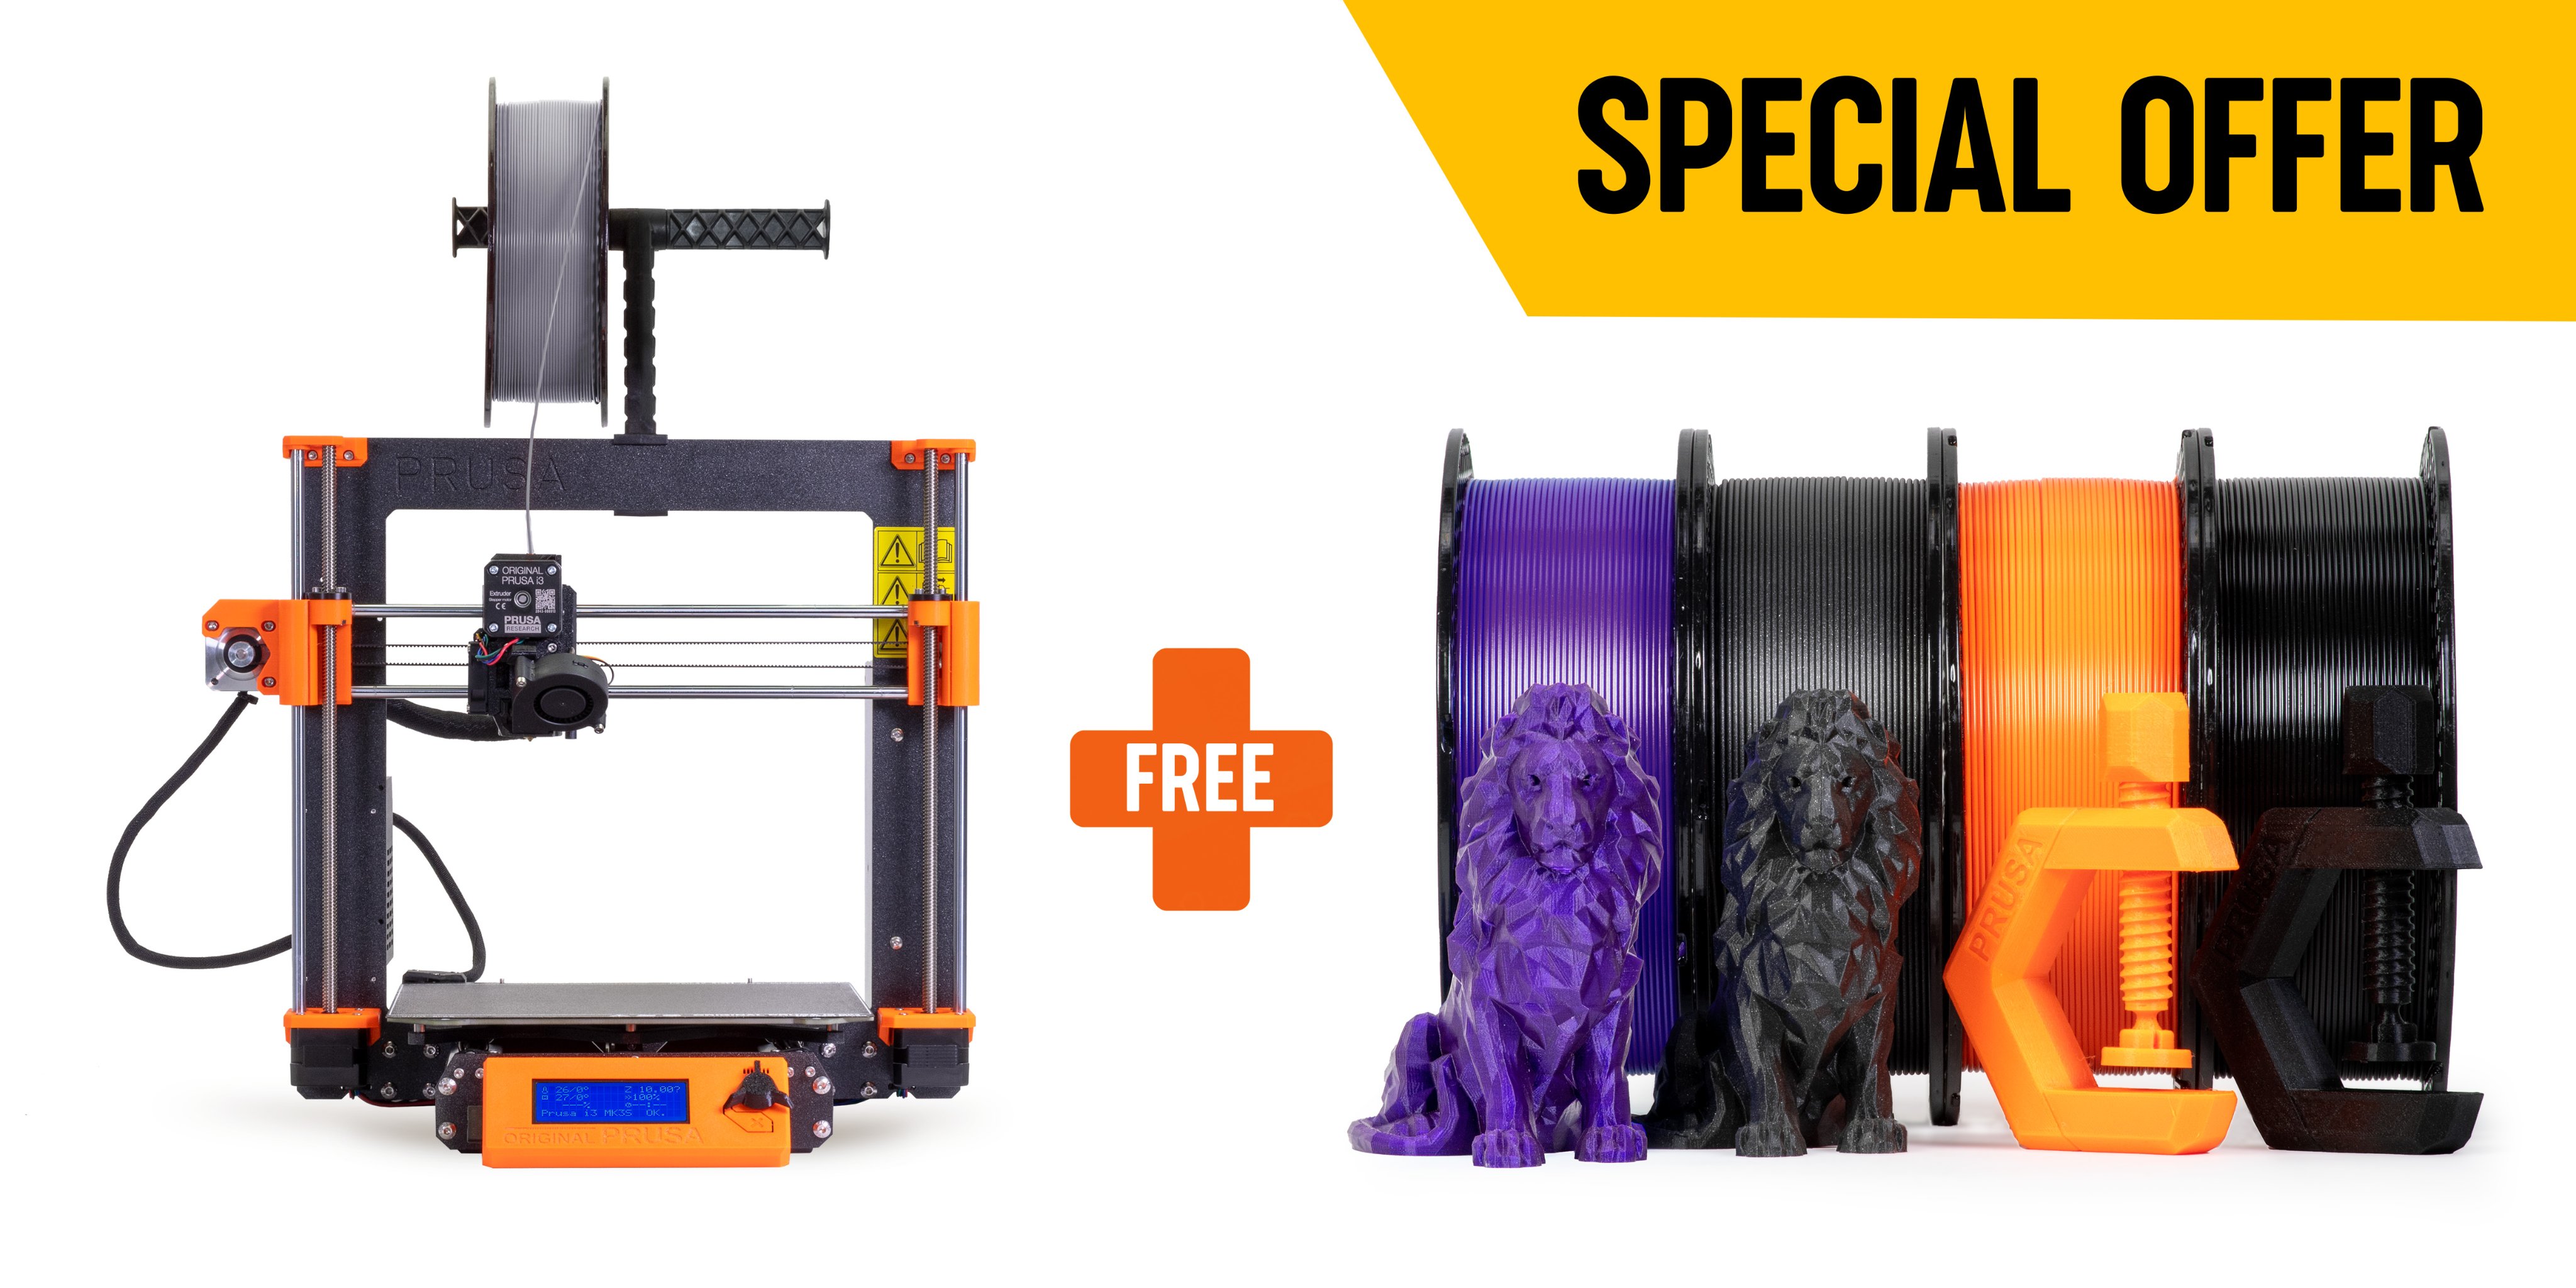 Prusa3D by Josef Prusa on Twitter: "Back to School Bundle!🎁 We'll add 4  extra Prusament spools to every Original Prusa i3 MK3S+ 3D printer  (assembled and kit) completely for free. In total,